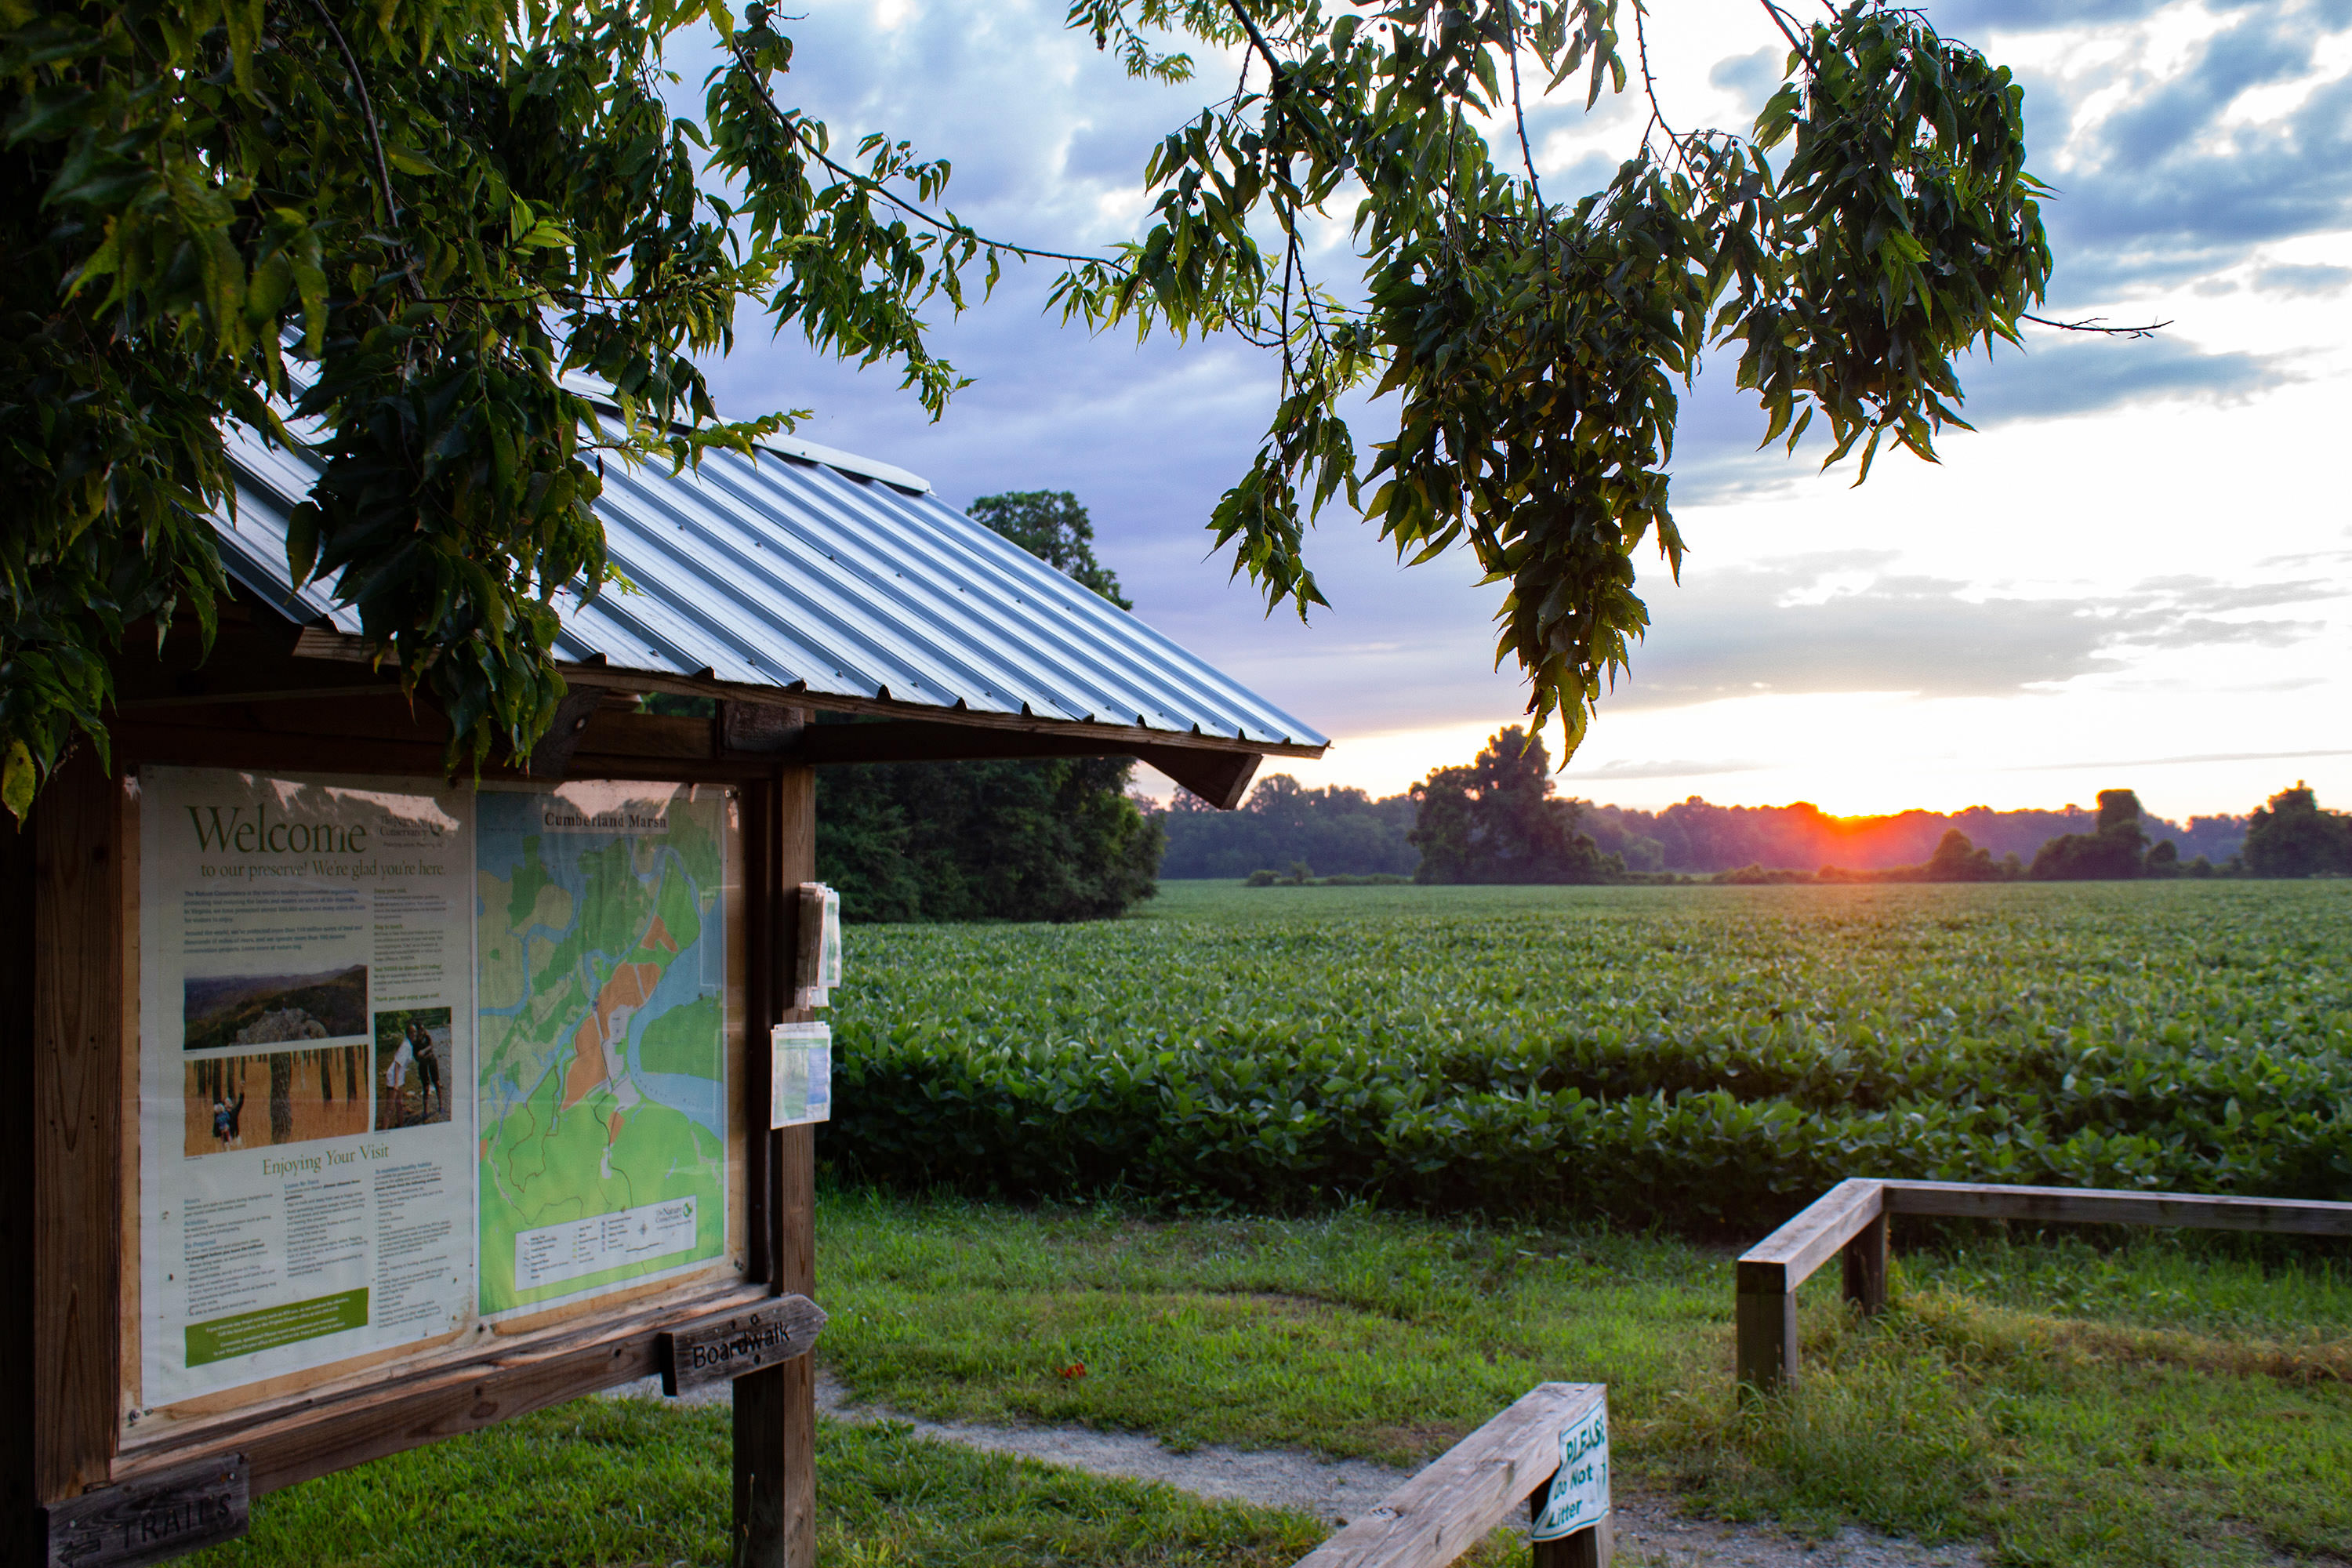 The rising sun peeks over the horizon at the edge of a farm field. A sign kiosk in the foreground welcomes visitors to Cumberland Marsh.